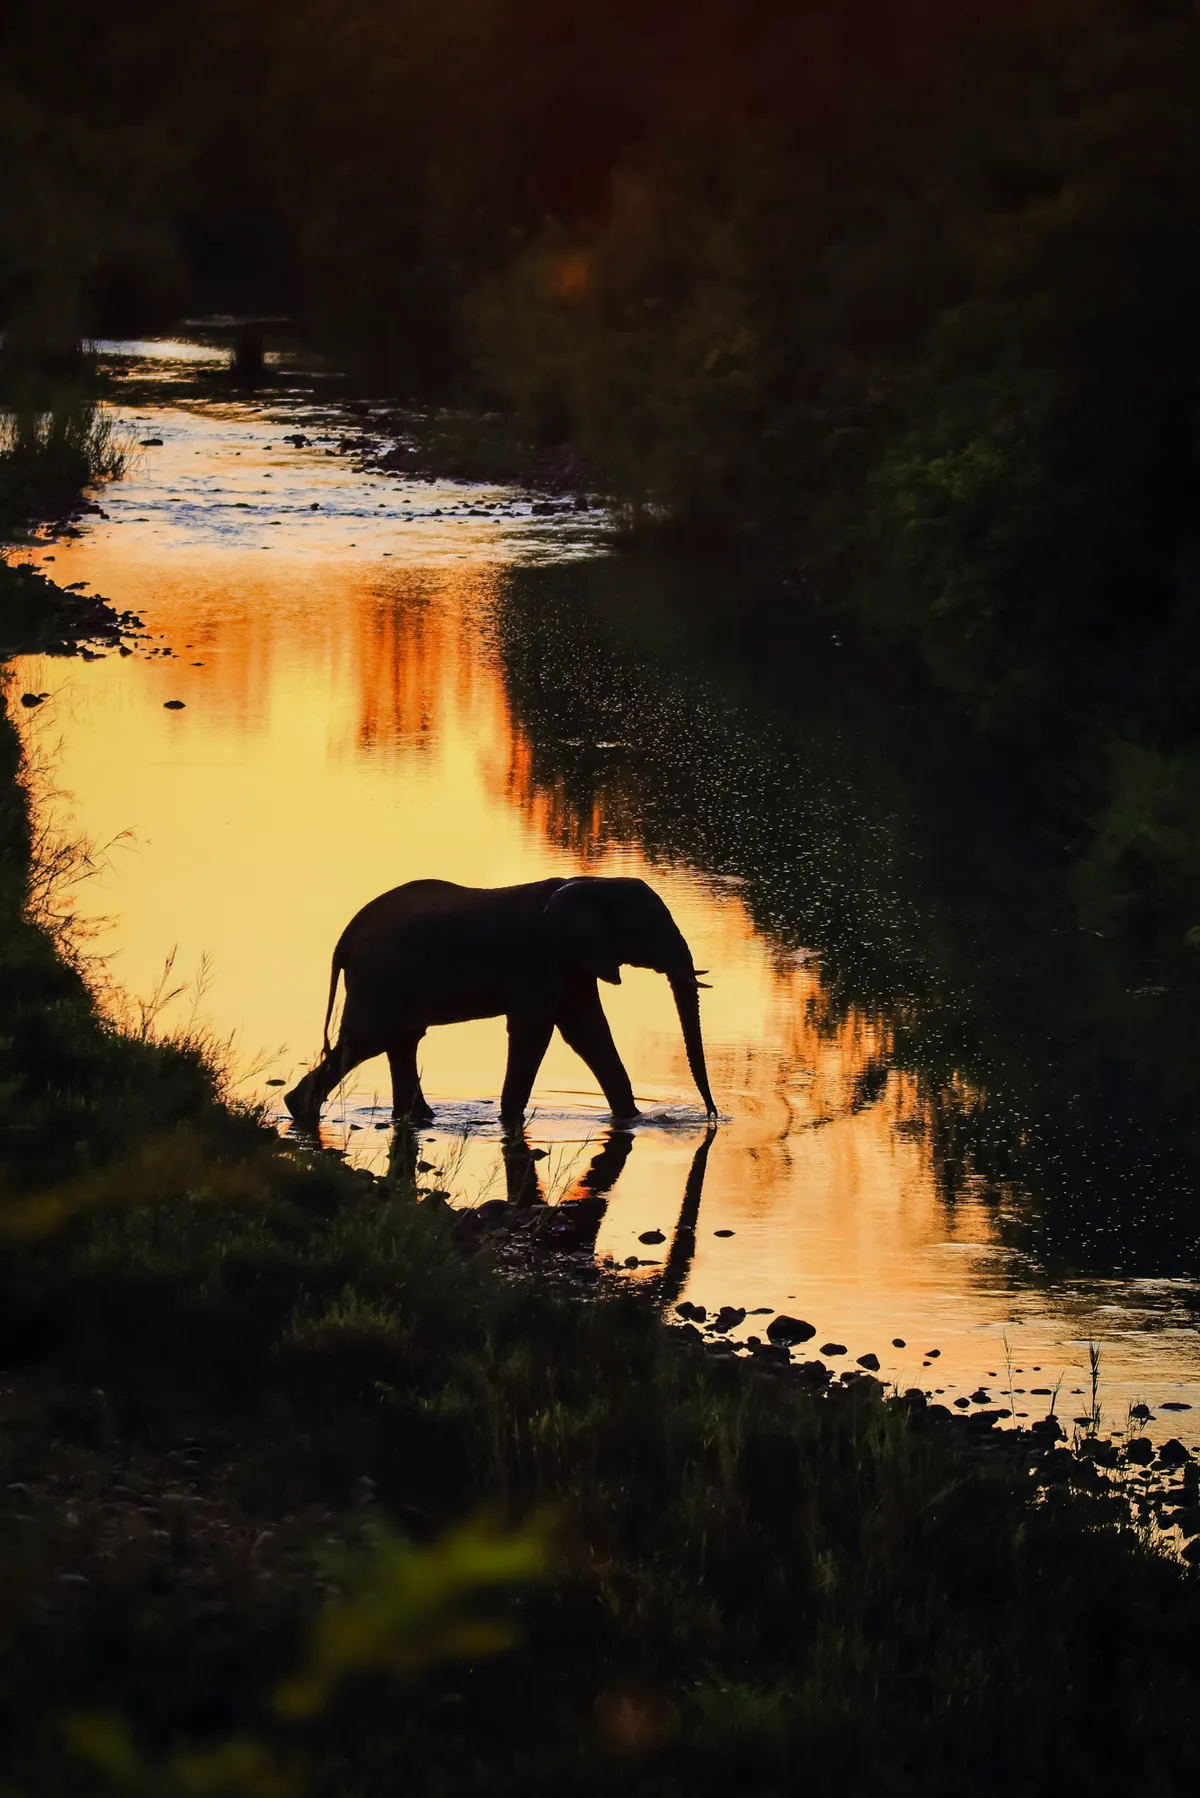 A silhouette of a lone elephant crossing a narrow river, the water brightly lit up in yellows and golds.